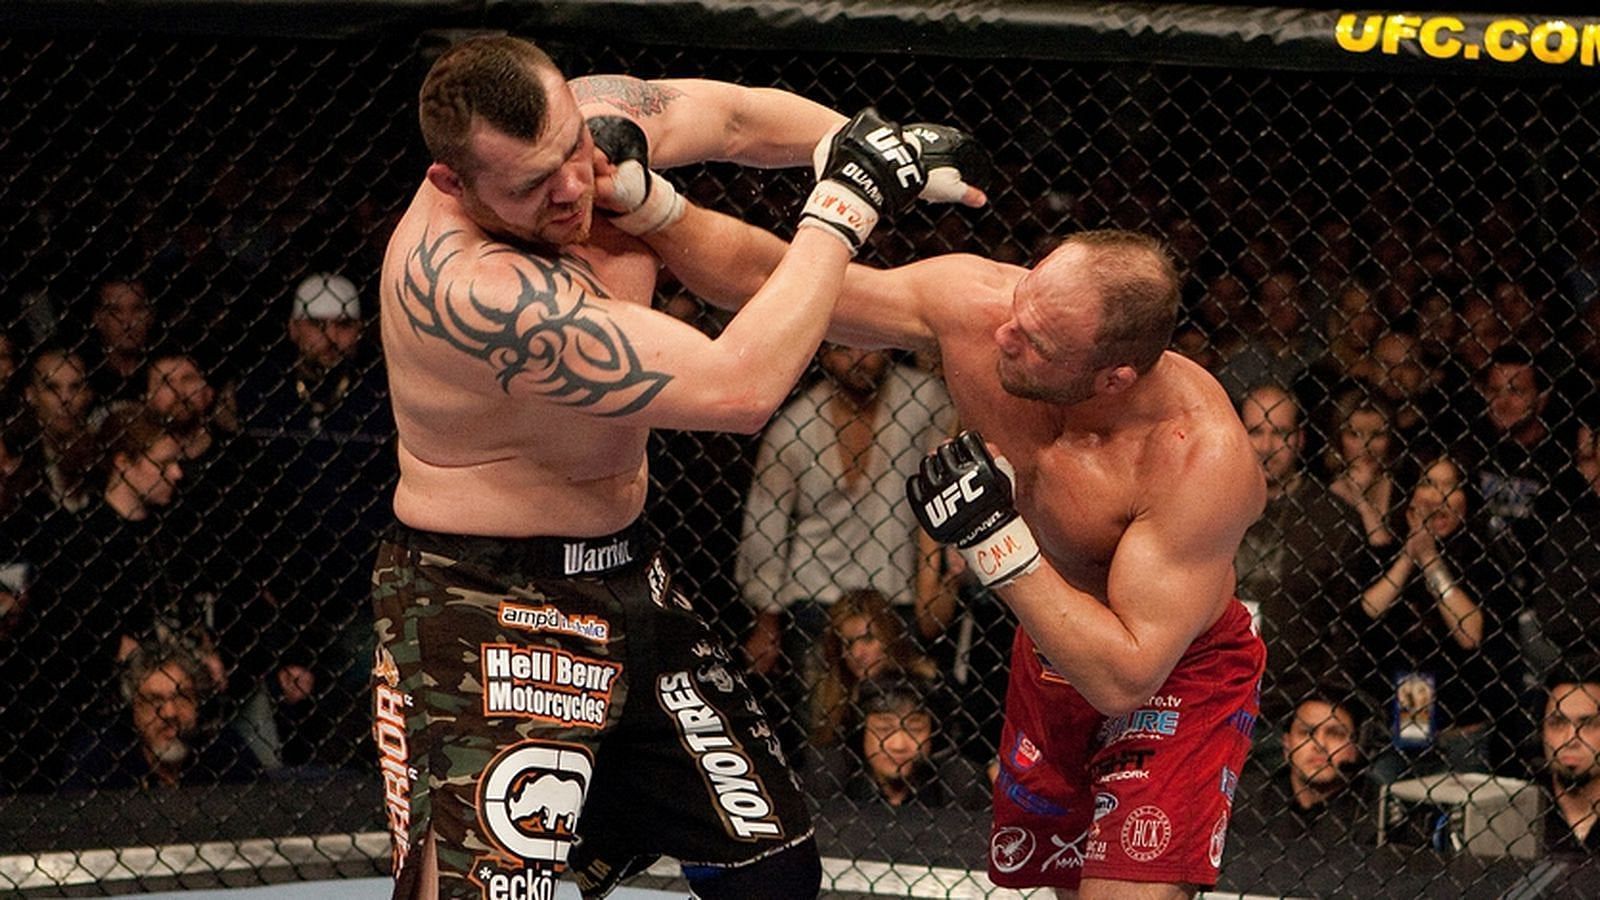 2007 saw Randy Couture return from retirement to face Tim Sylvia in an instant heavyweight title shot